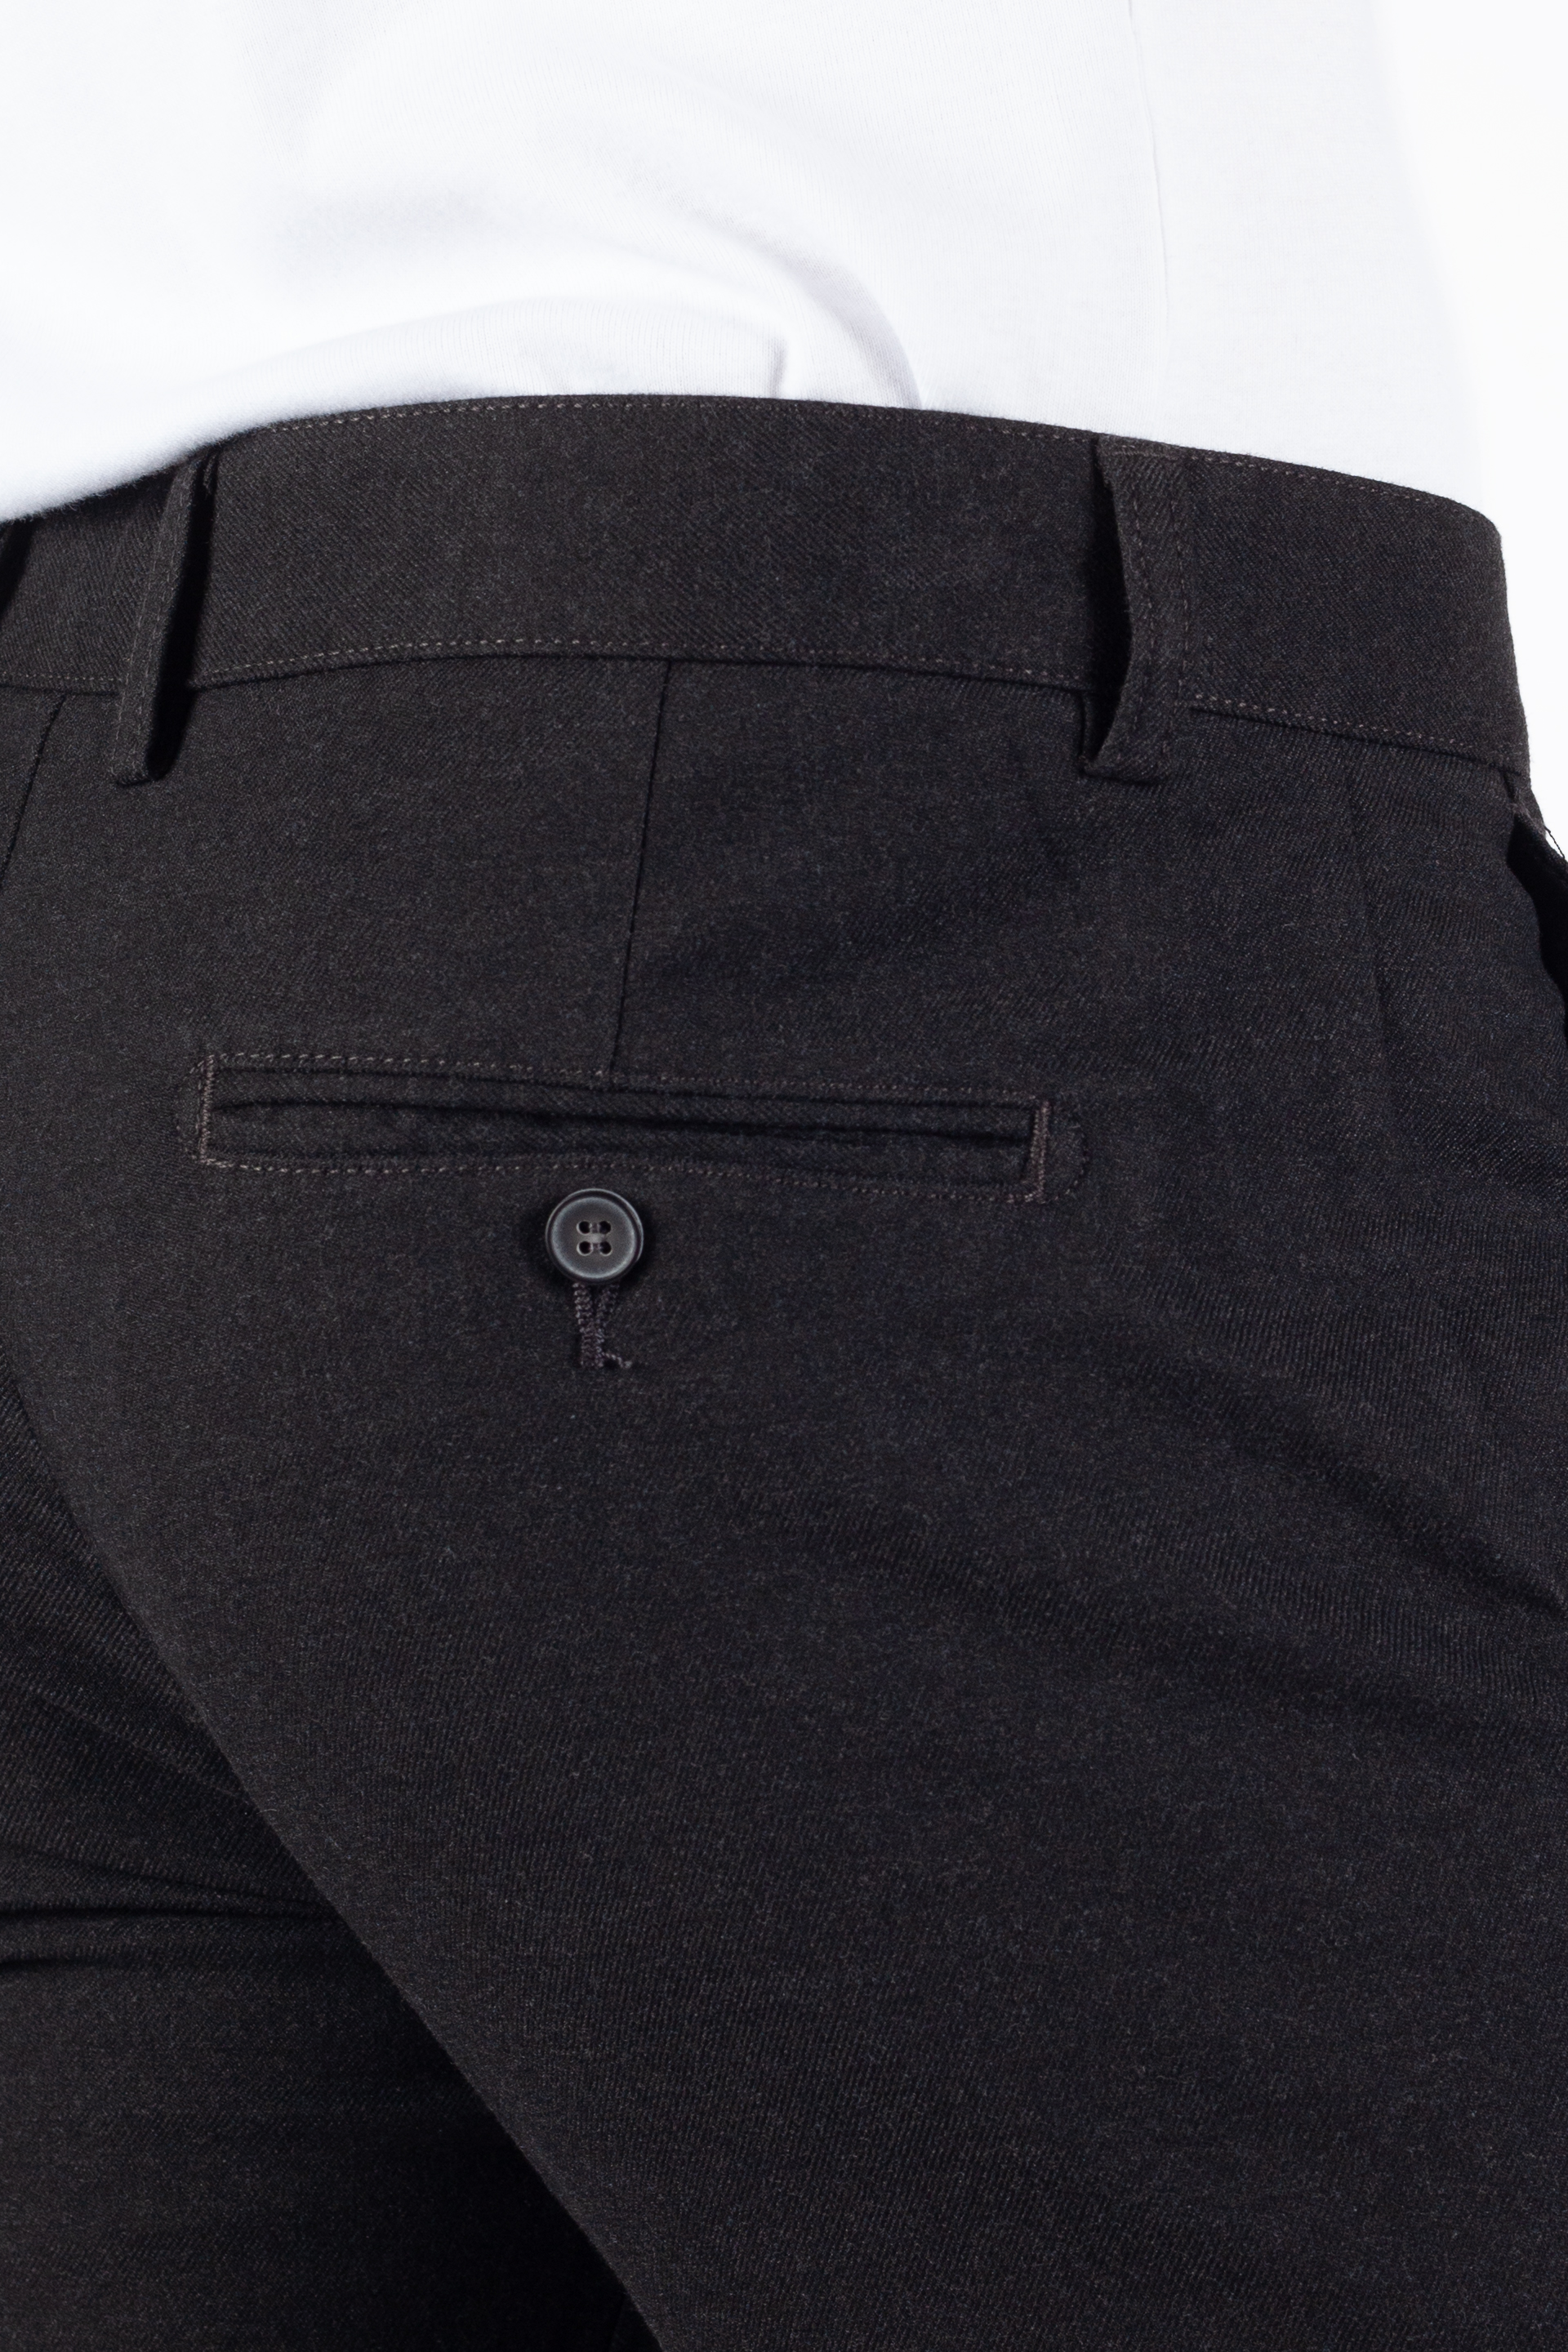 Chino pants BLK JEANS 8400-1077-102-201